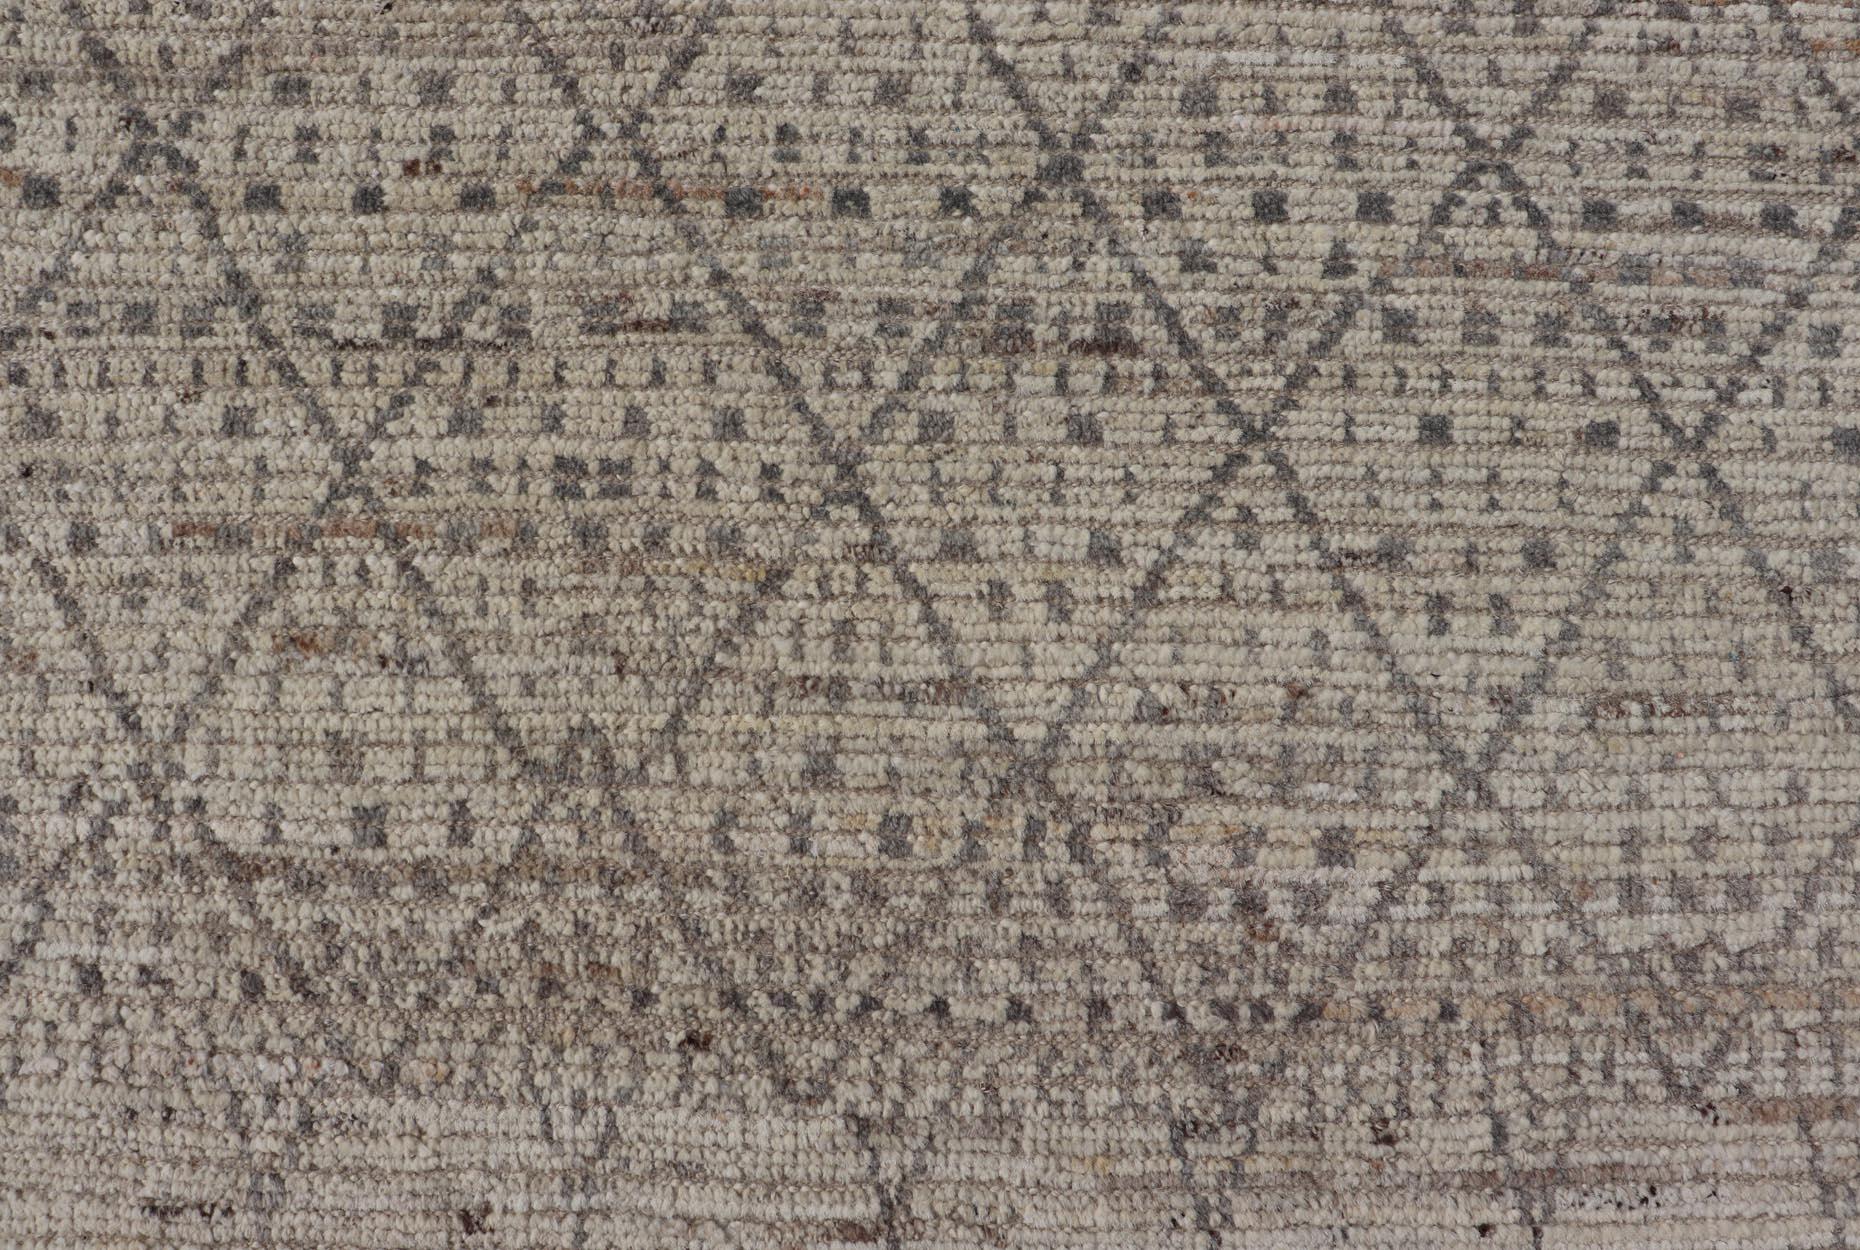 Hand-Knotted Modern Moroccan Type Rug in Wool with All-Over Diamond Design in Earthy Tones For Sale